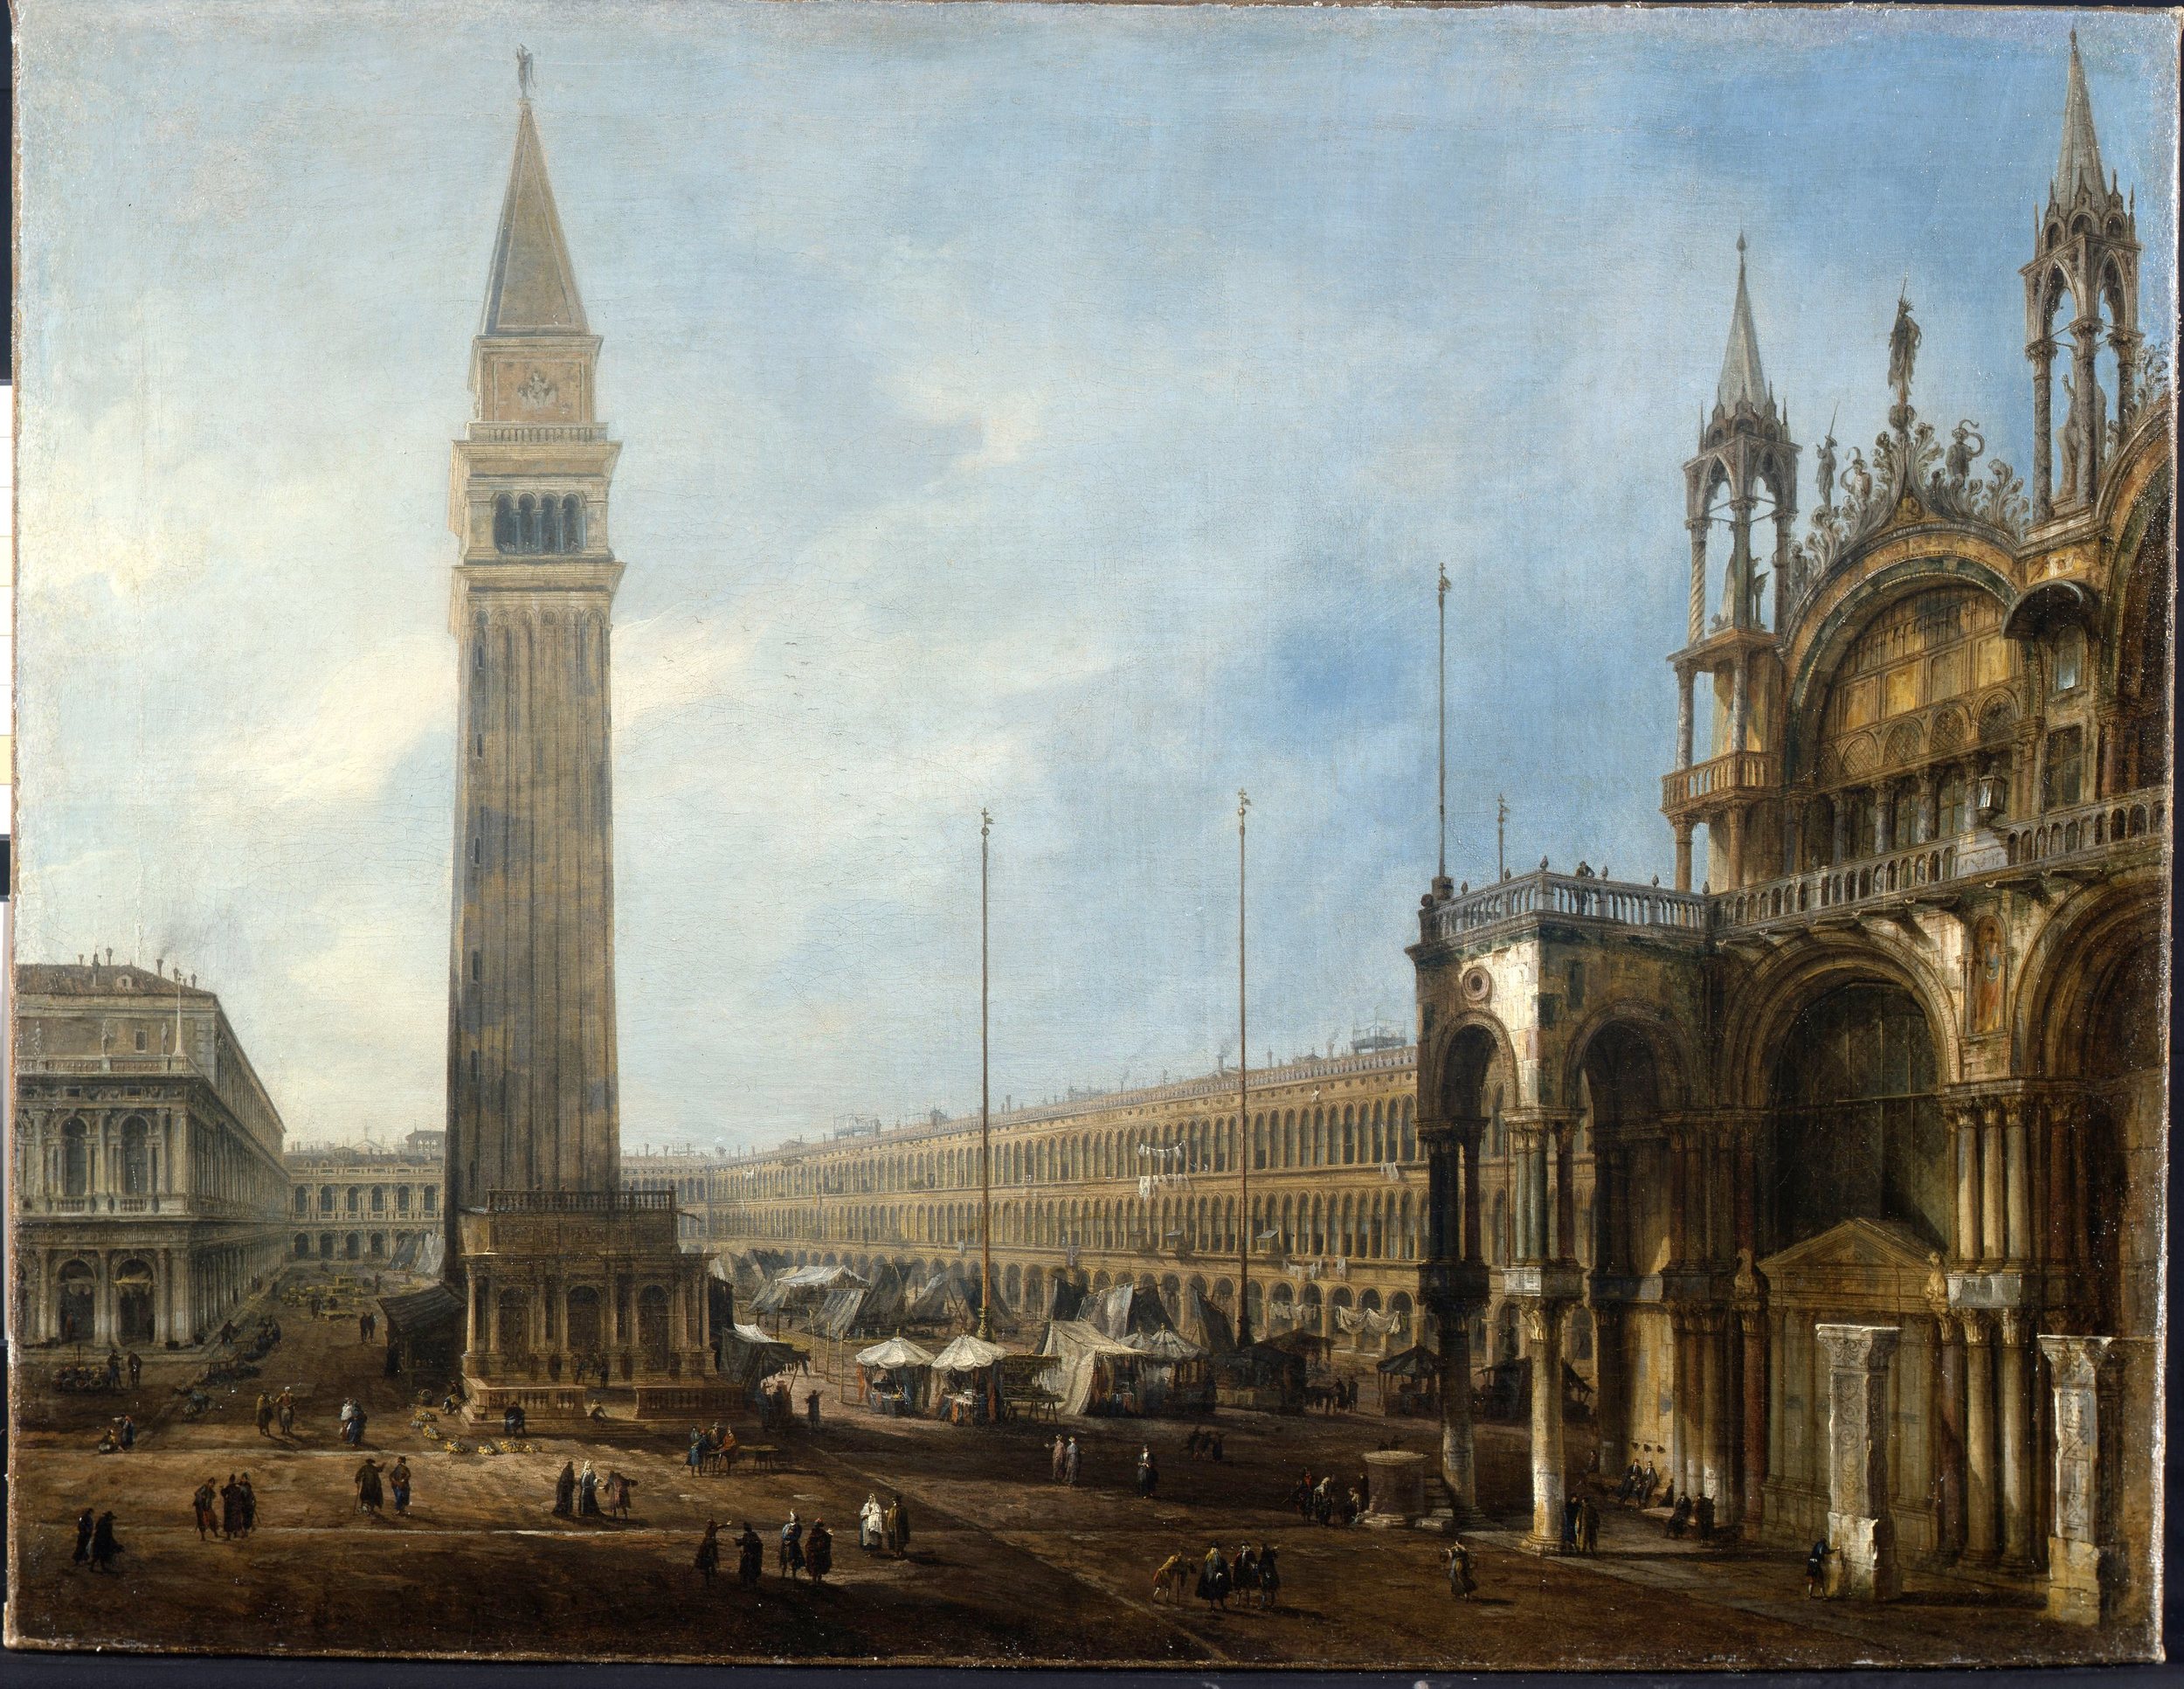 Canaletto, "Venice: The Piazza San Marco, Looking West from the North End of the Piazzetta" Oil on canvas 65 x 95 cm Princely Collection of Liechtenstein, Vienna